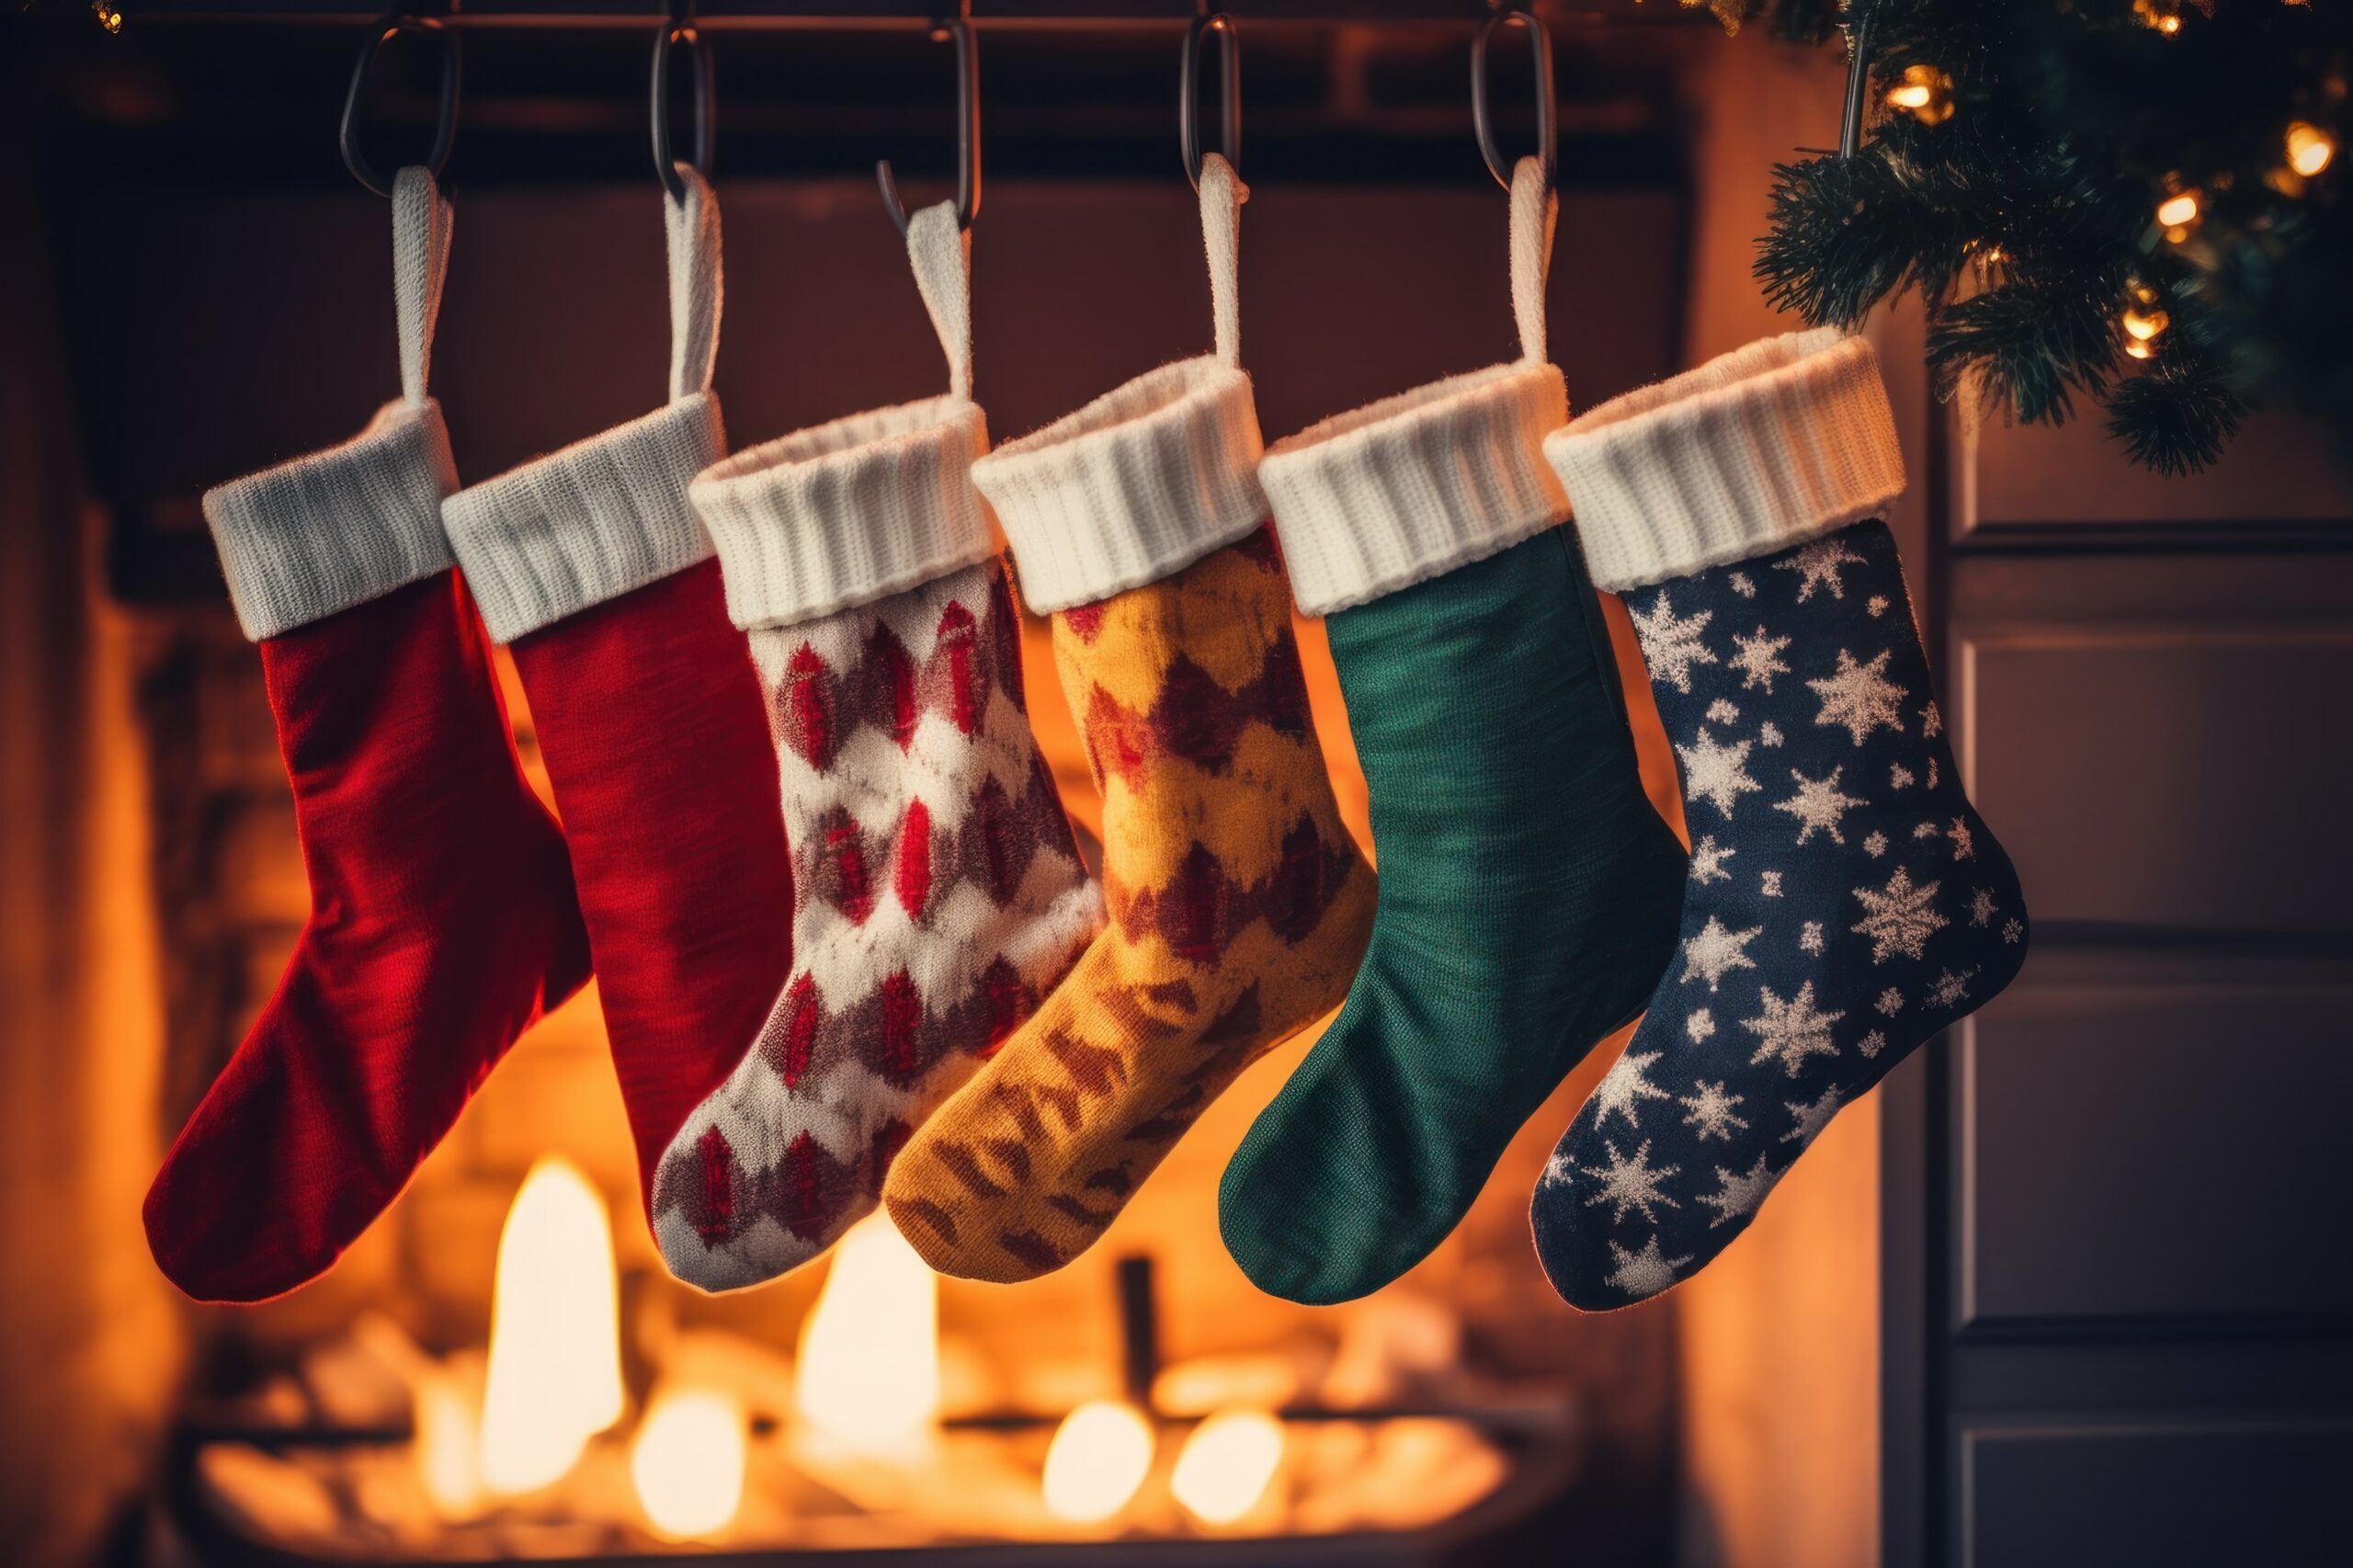 Row of stockings hang in front of a fireplace